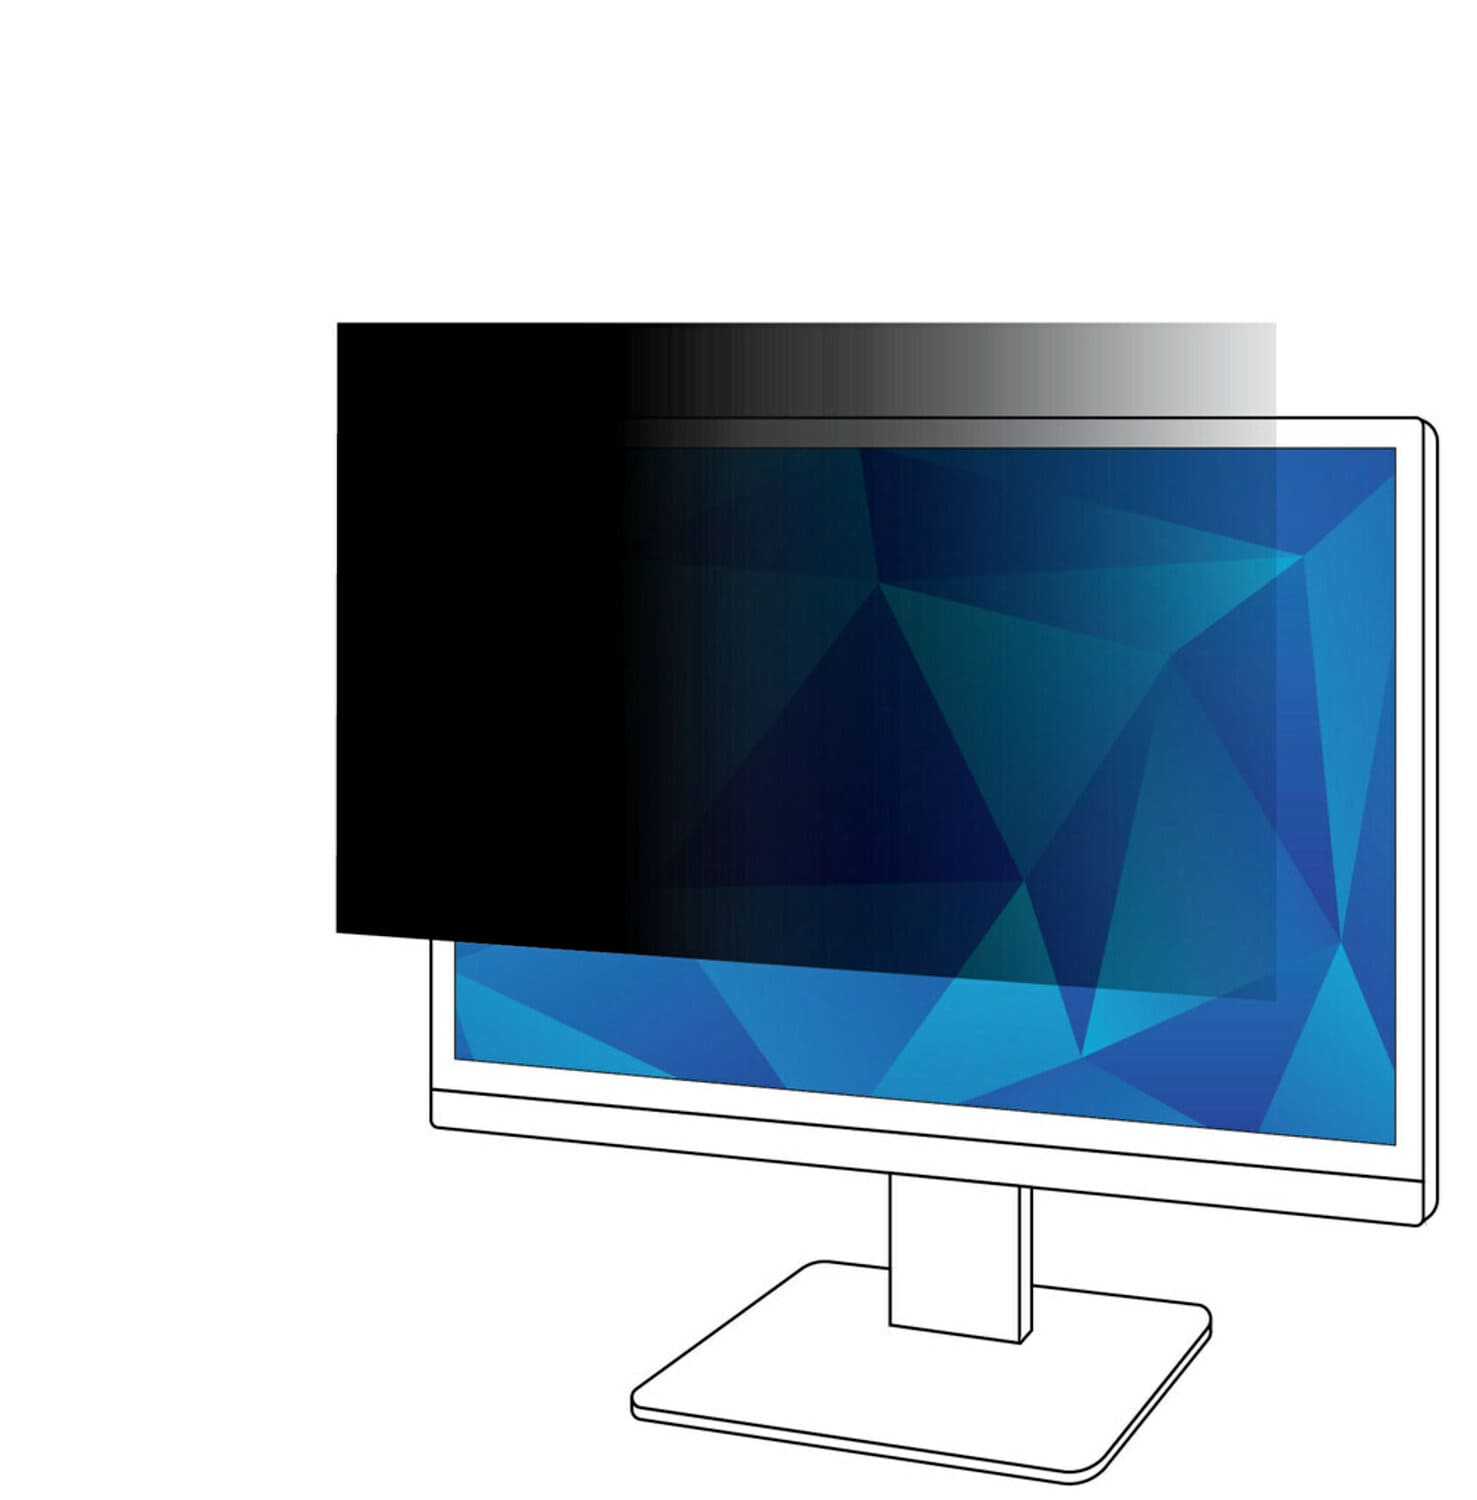 7100158943 - 3M Privacy Filter for 43in Monitor, 16:9, PF430W9B